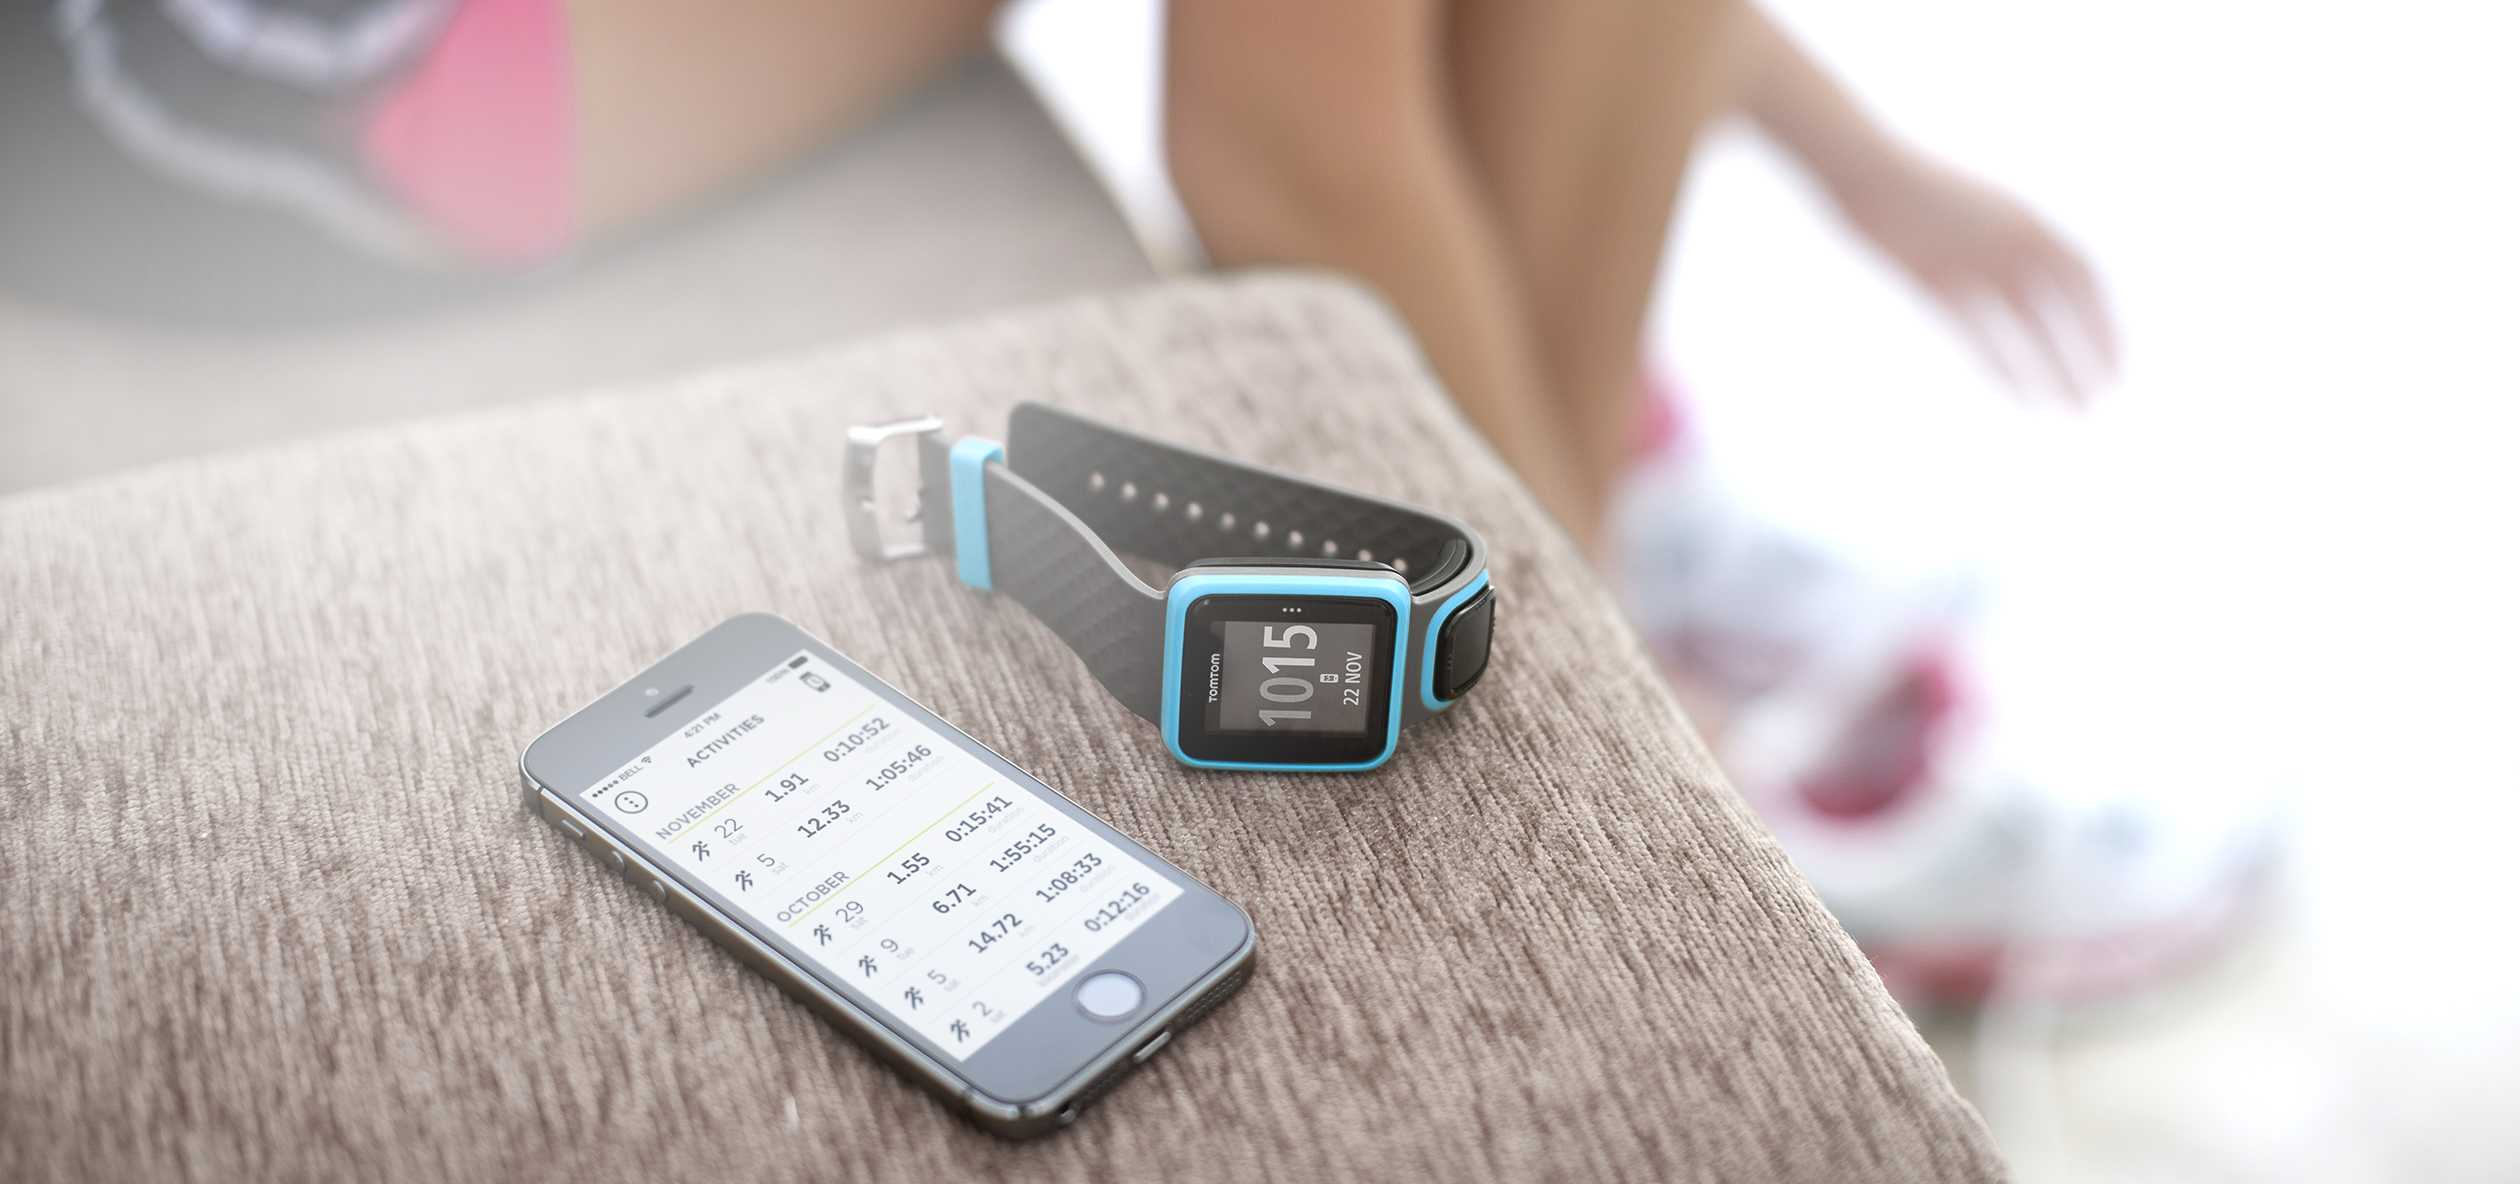 TomTom Integrates Nike+ Support into Wearables